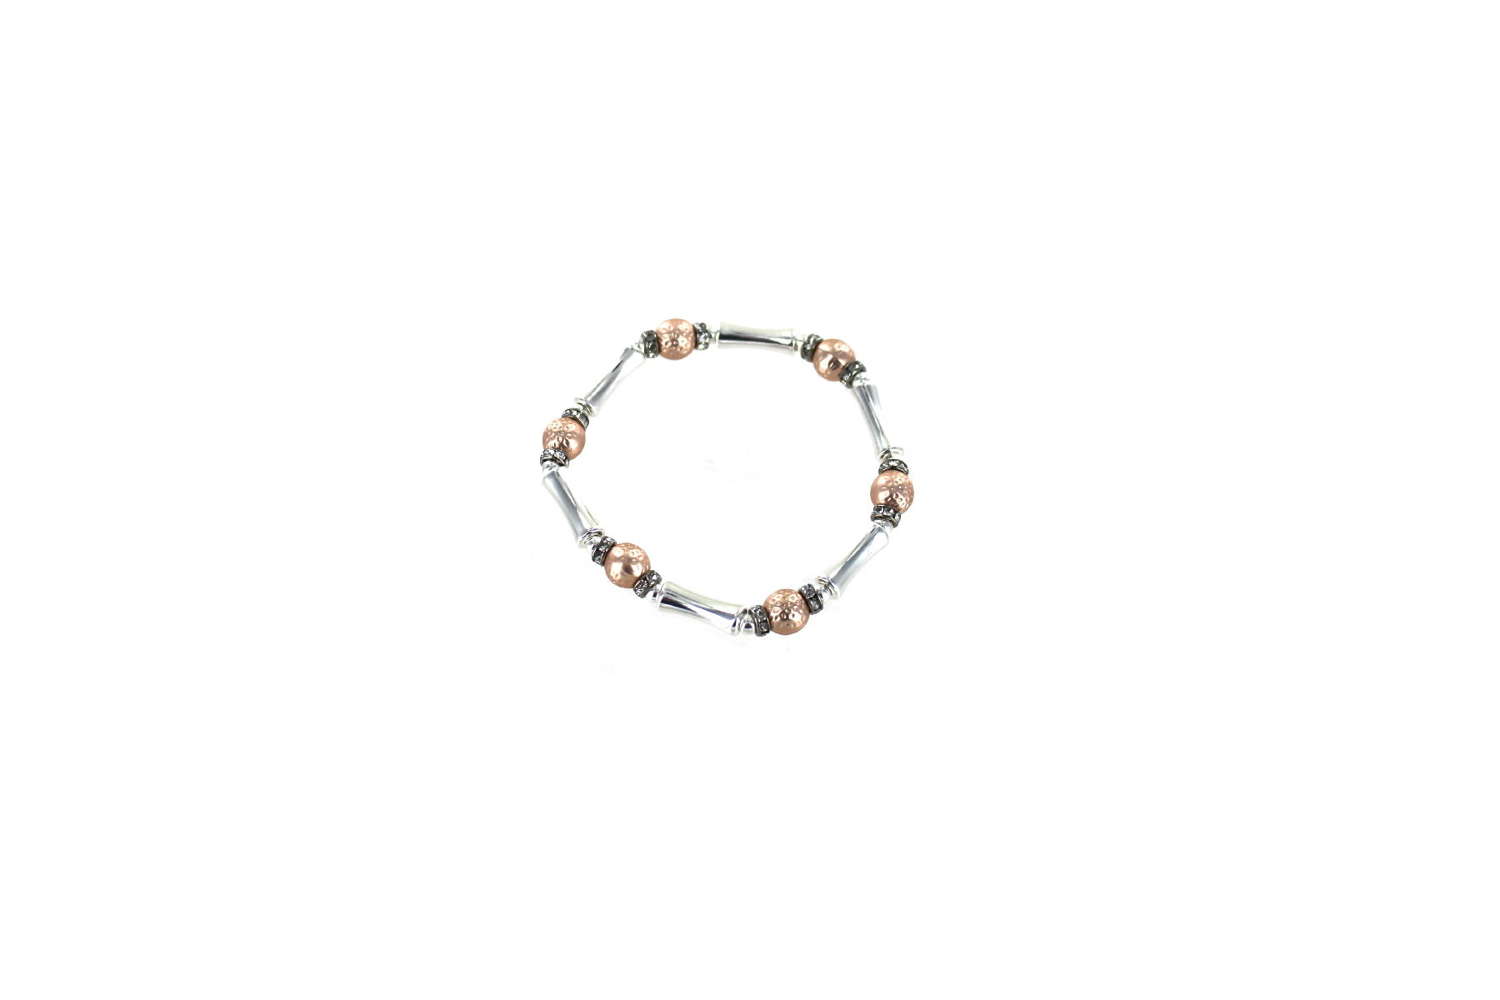 Rose gold tone and silver tone elasticated beaded bracelet.